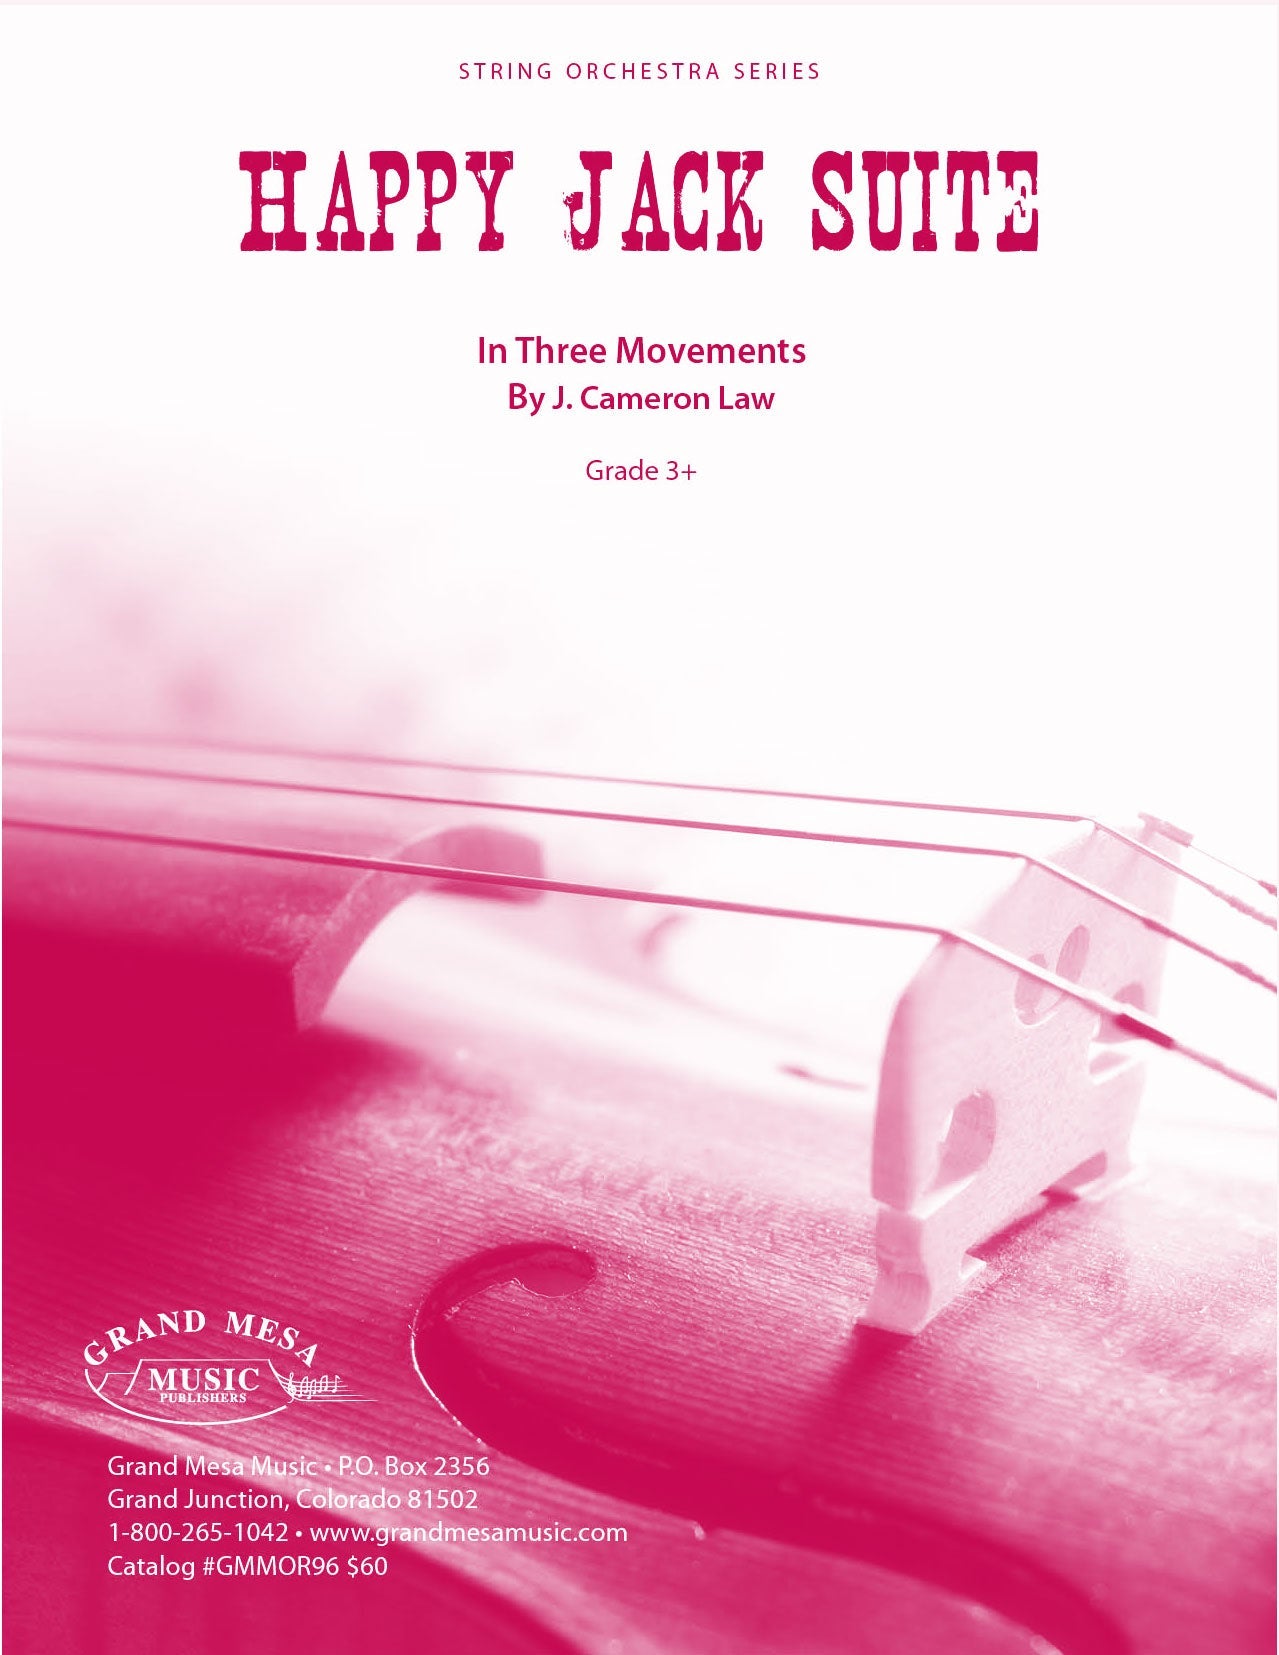 Strings sheet music cover of Happy Jack Suite, composed by J. Cameron Law.